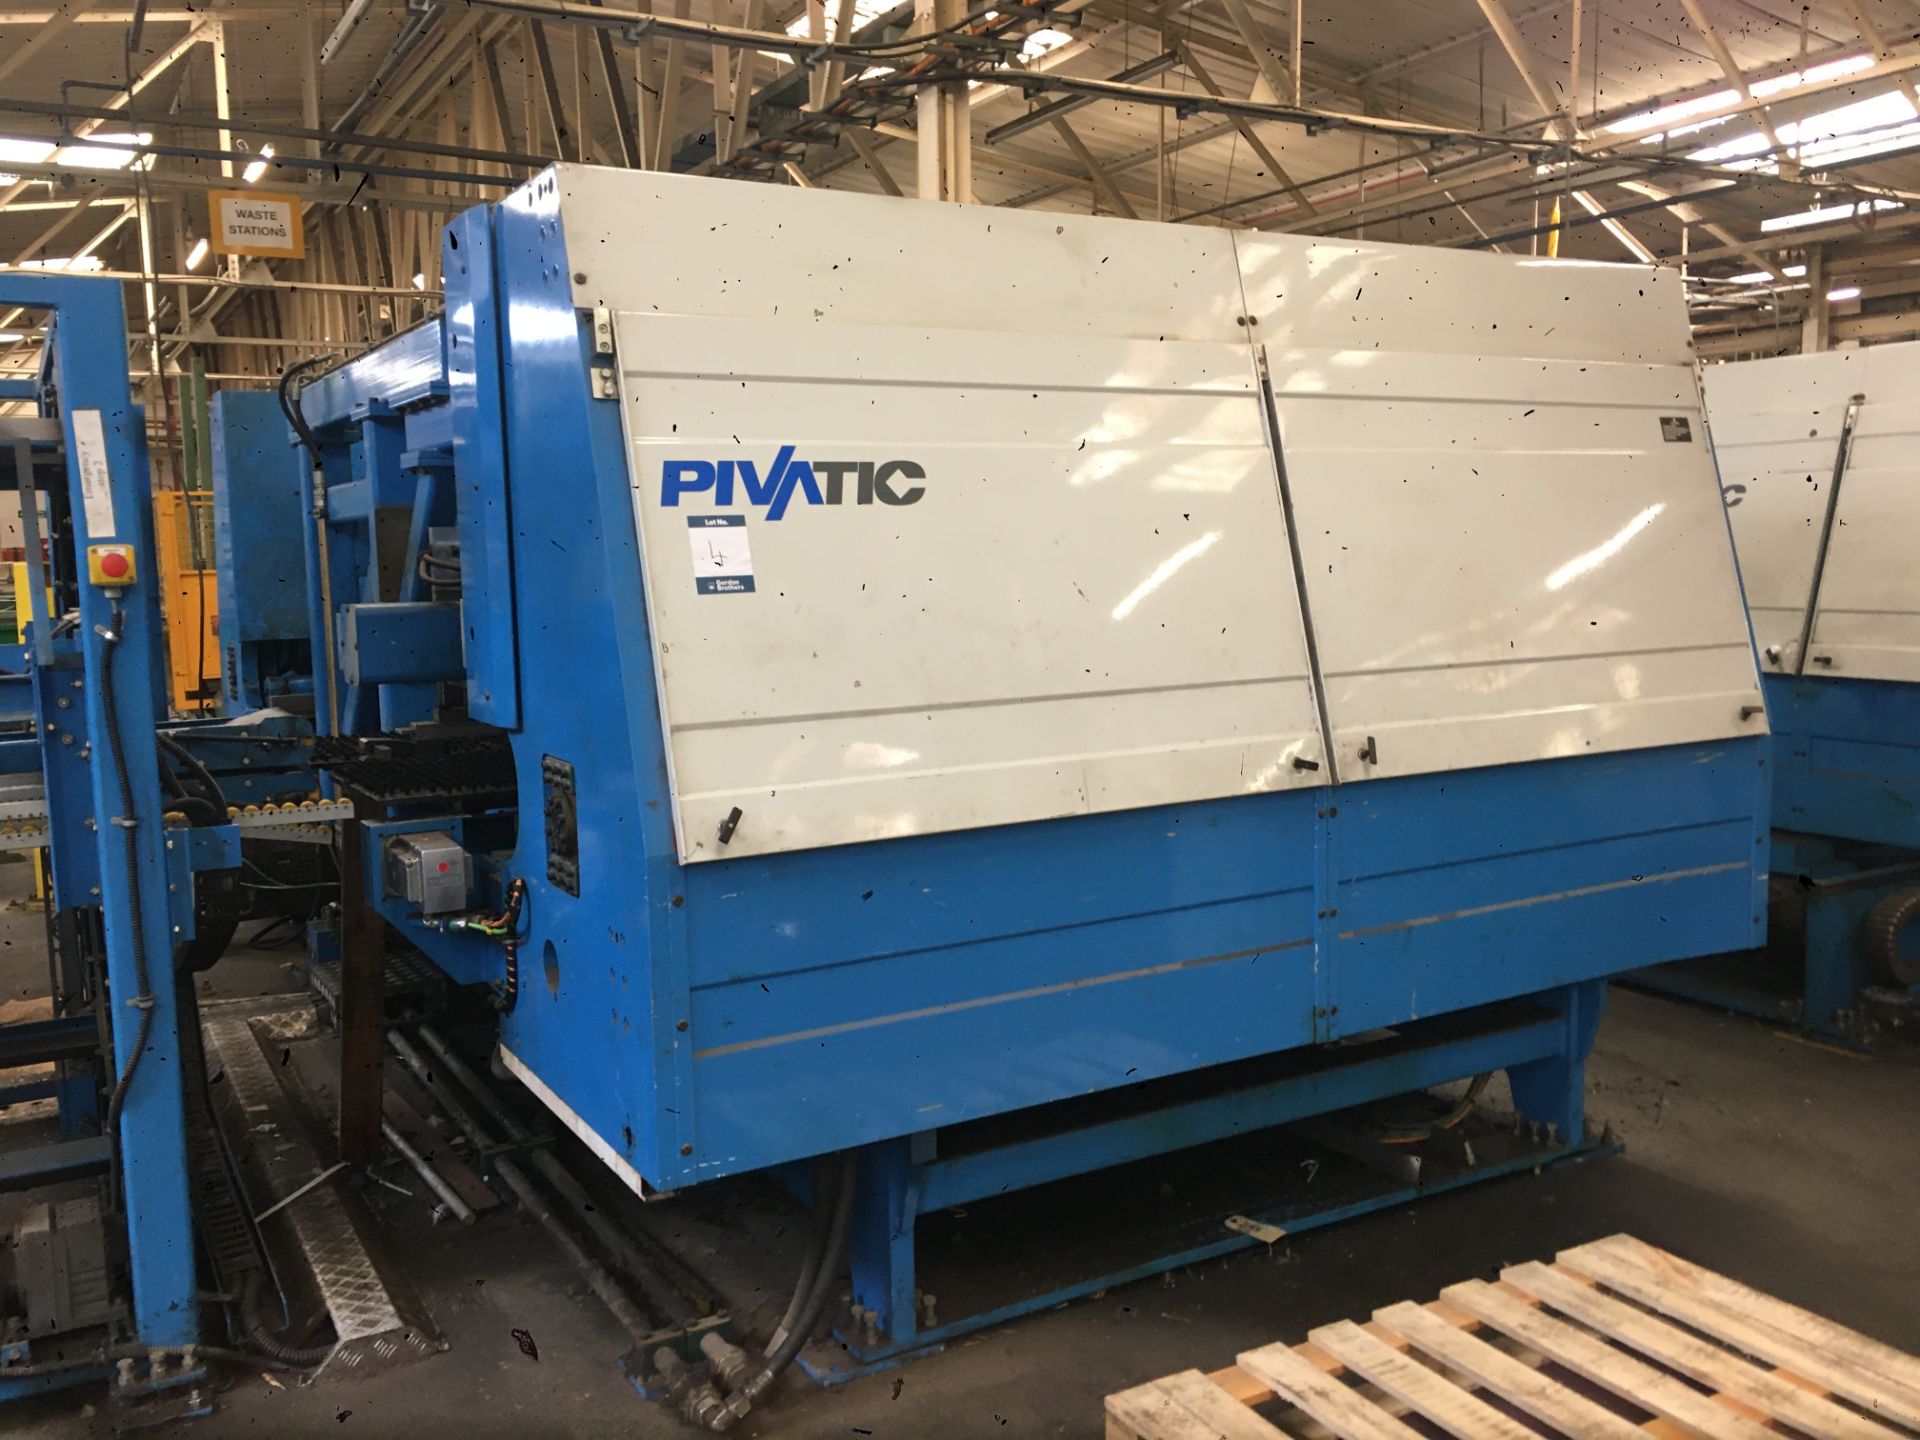 Pivatic, Flexible Fabricating System ("FFS") (2004) comprising: 2x track mounted coil cars; de-